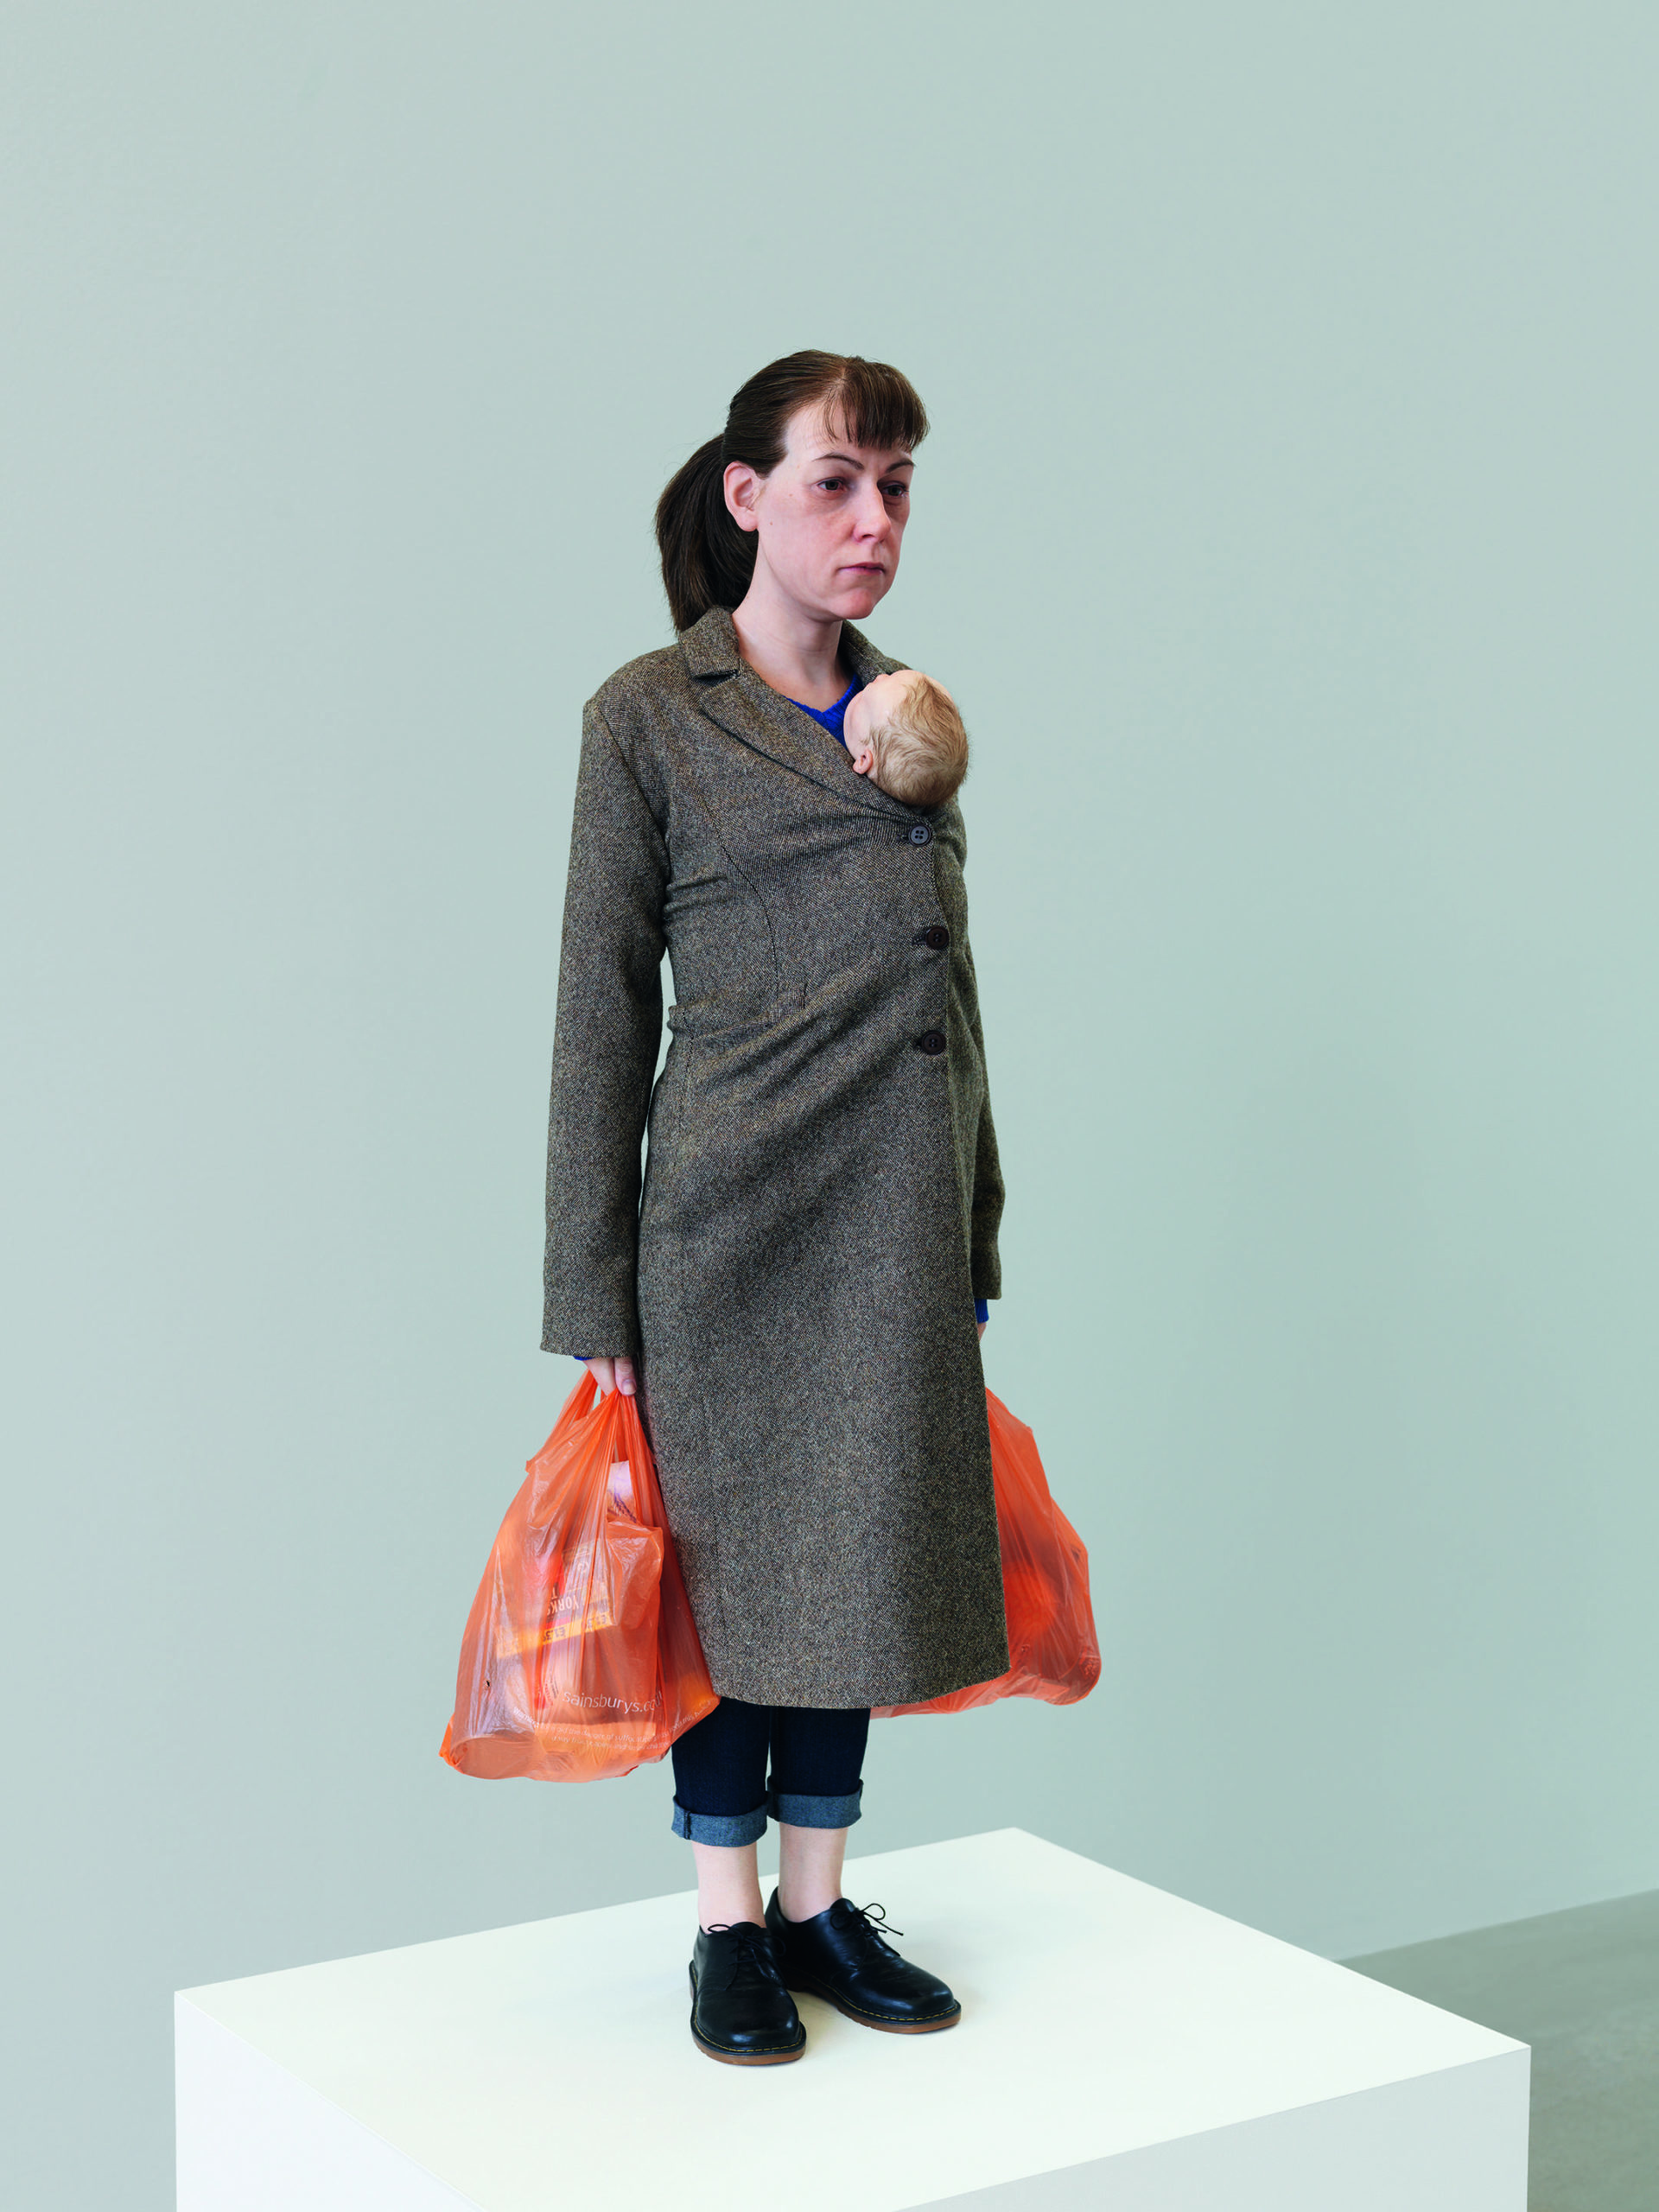 Ron Mueck at The Modern